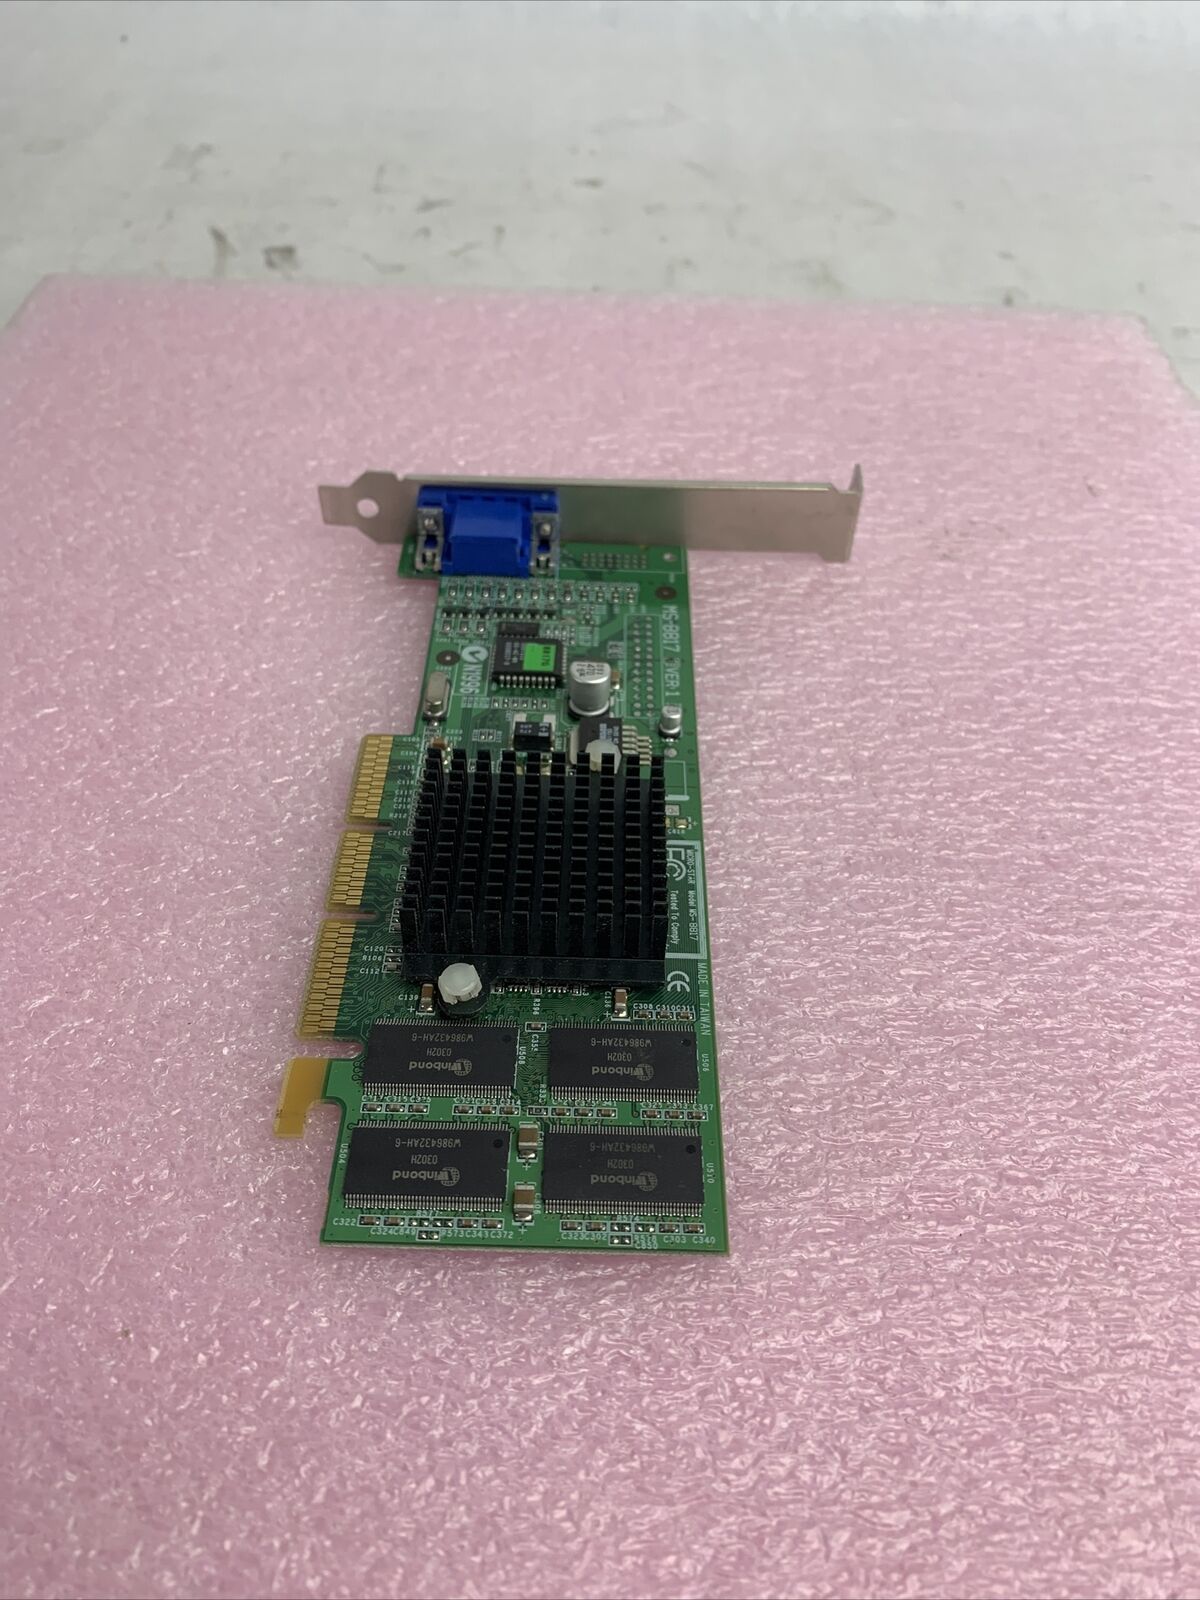 Micro Star ms-8817 6001743 video graphics card